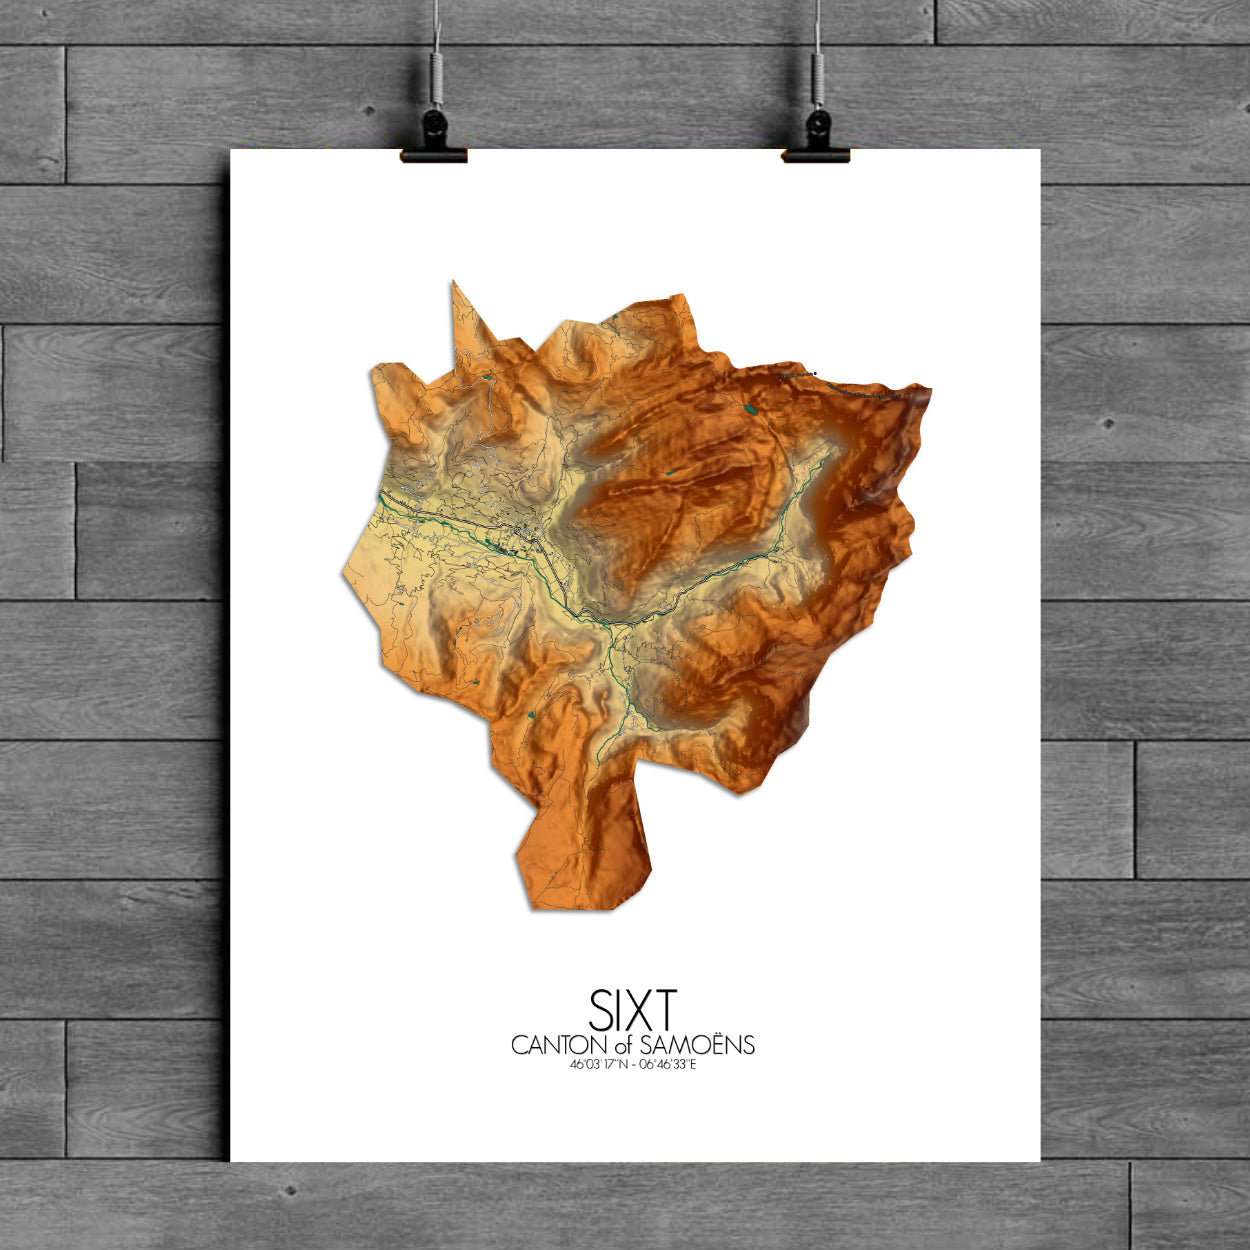 Poster of Sixt France | Elevation map